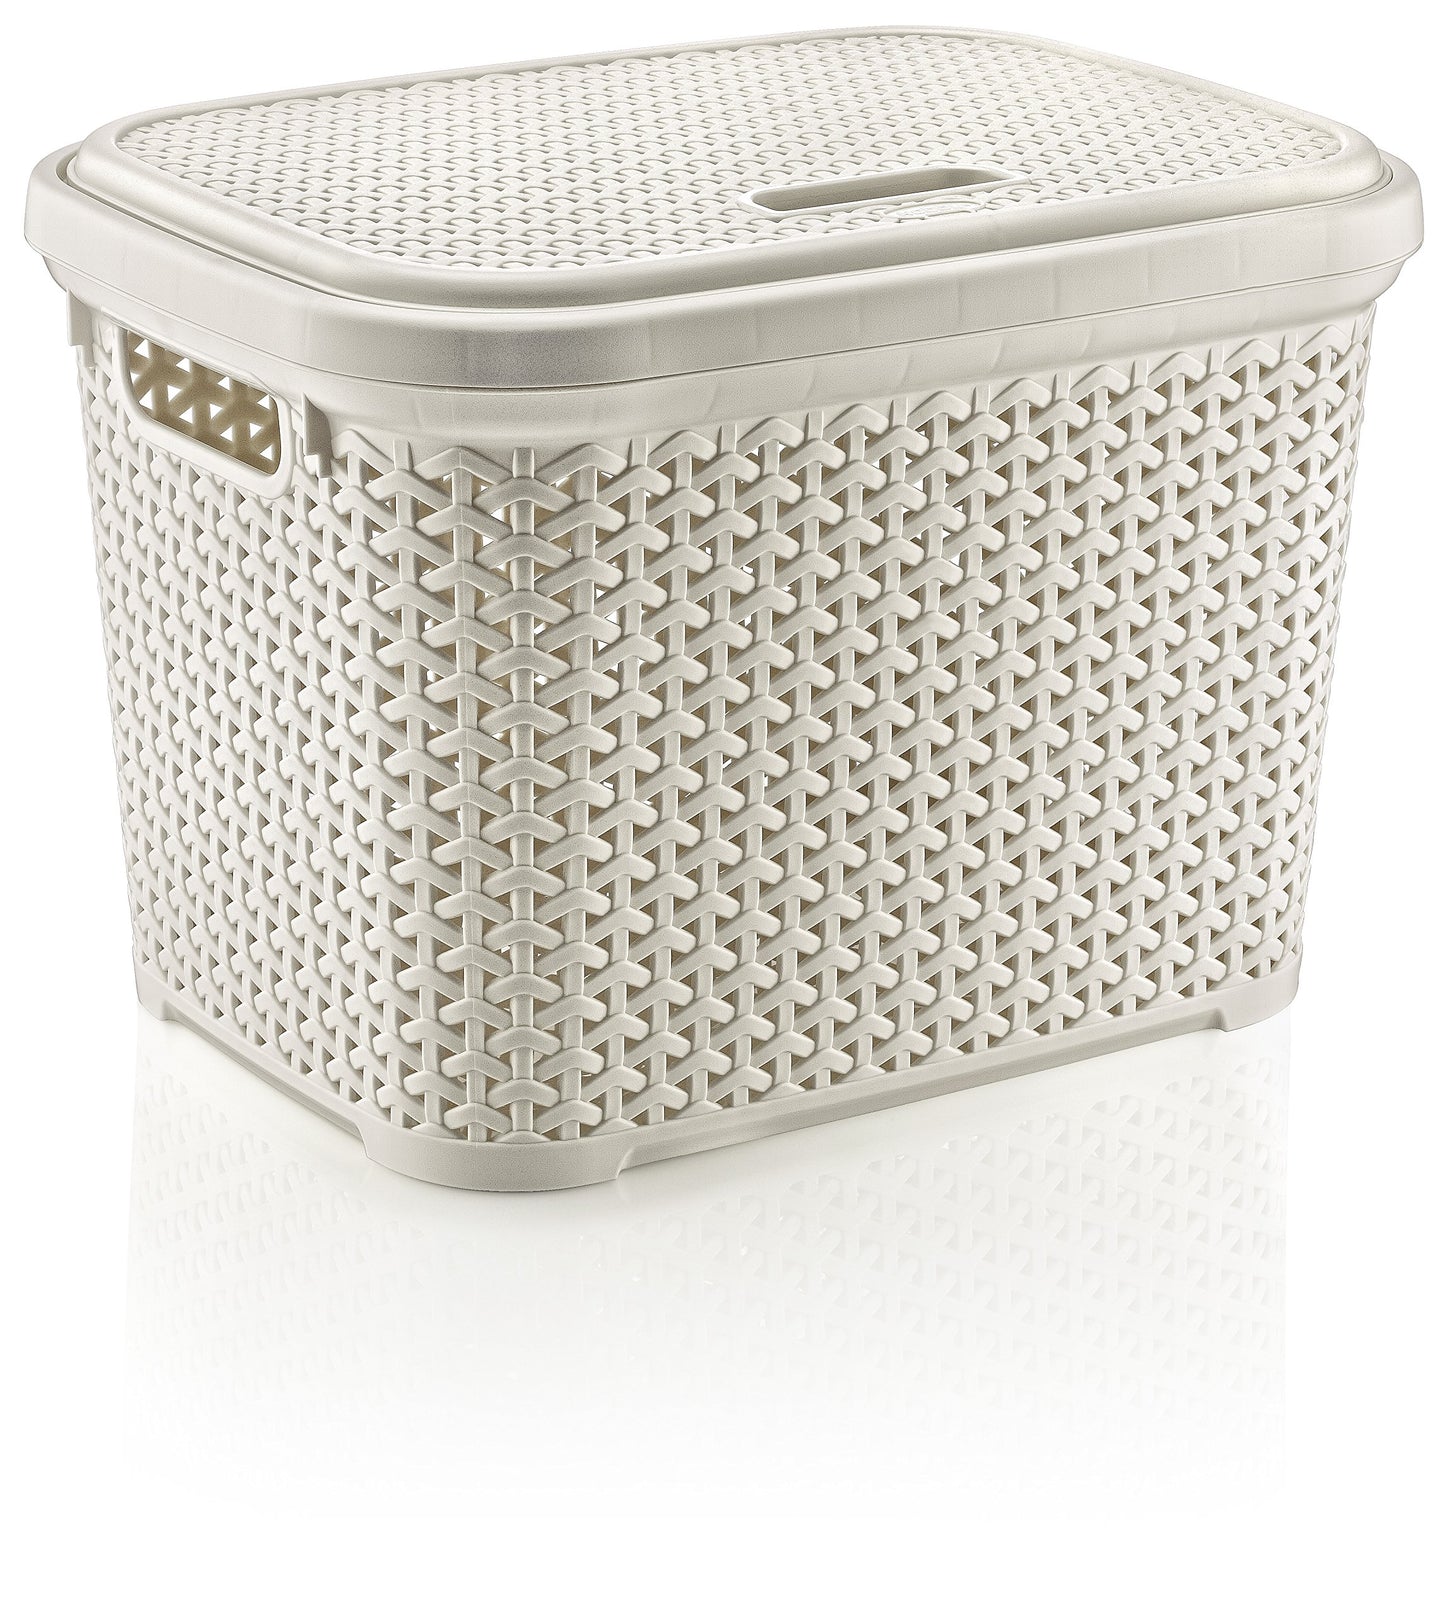 HOBBY LIFE 20 Litre Plastic Rattan Small Storage Box with Lid